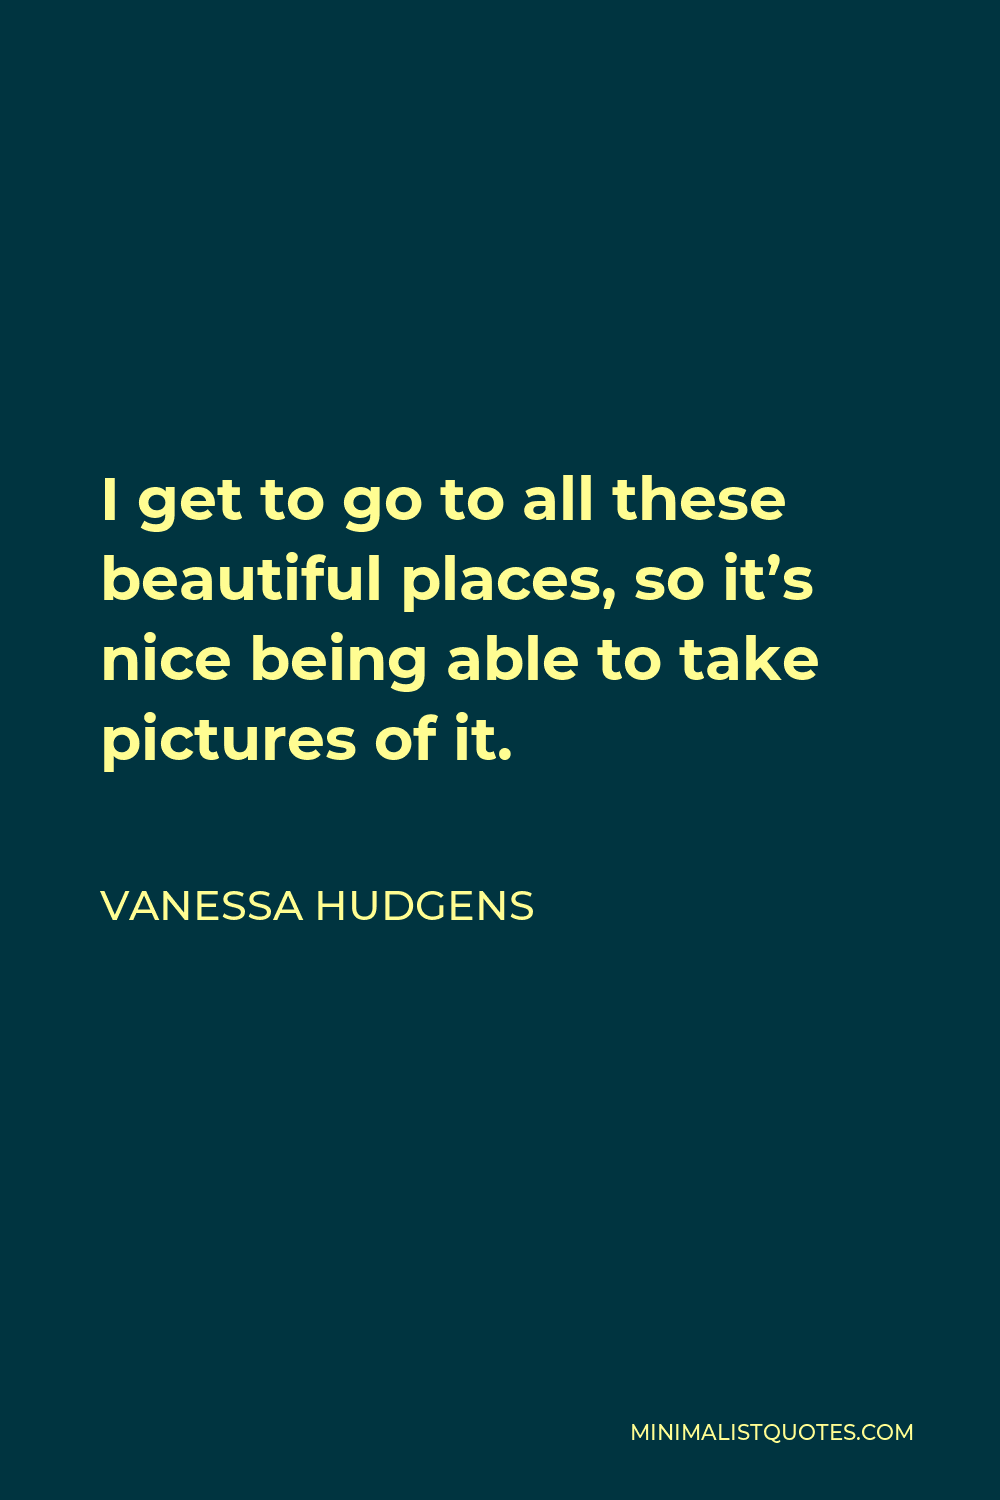 Vanessa Hudgens Quote - I get to go to all these beautiful places, so it’s nice being able to take pictures of it.